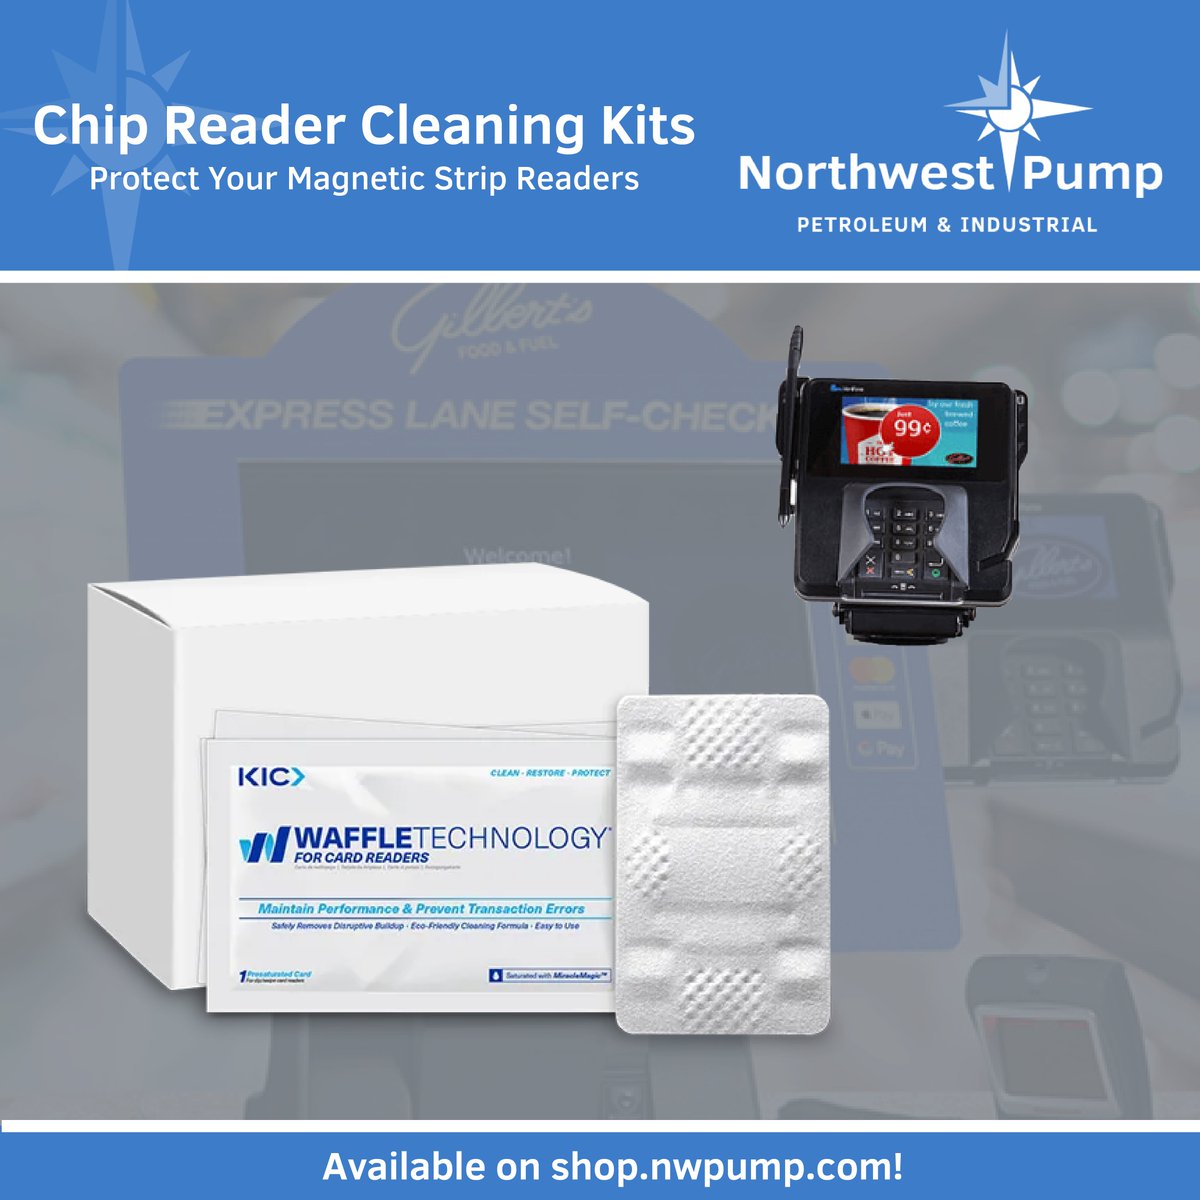 Don't forget about your chip readers during this year's spring cleaning! Our shop site has cleaning cards specifically designed to clean the delicate magnet readers in your pin pads. Buy your card cleaners here: bit.ly/3wHAhFS

#servicestation #cardreader #pinpad #cstore